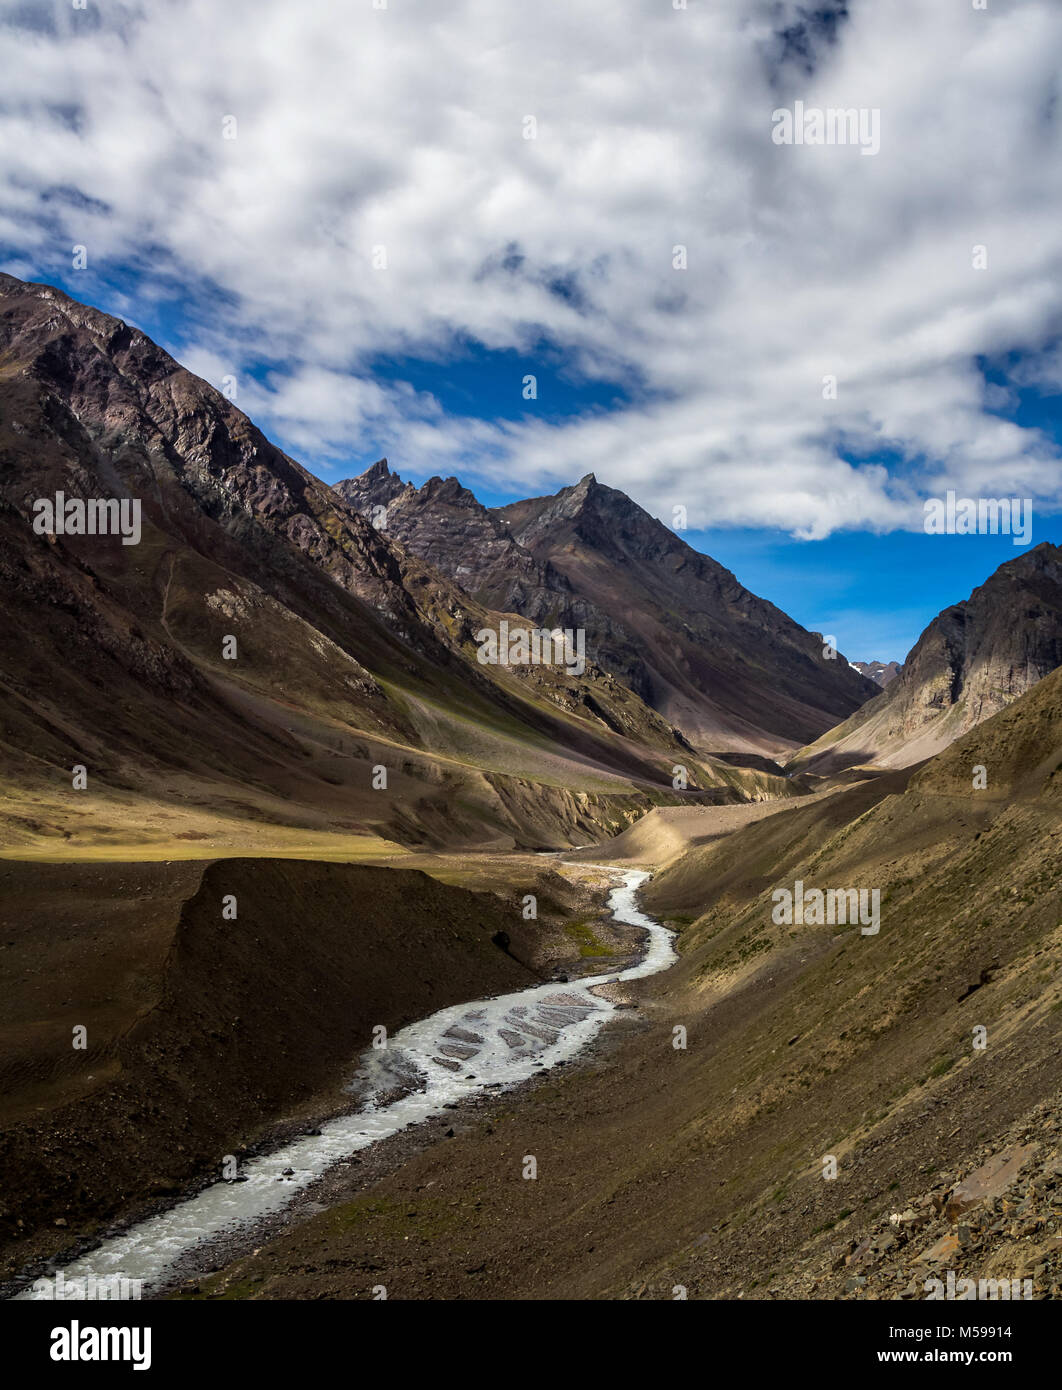 The mighty himalayan landscape Stock Photo